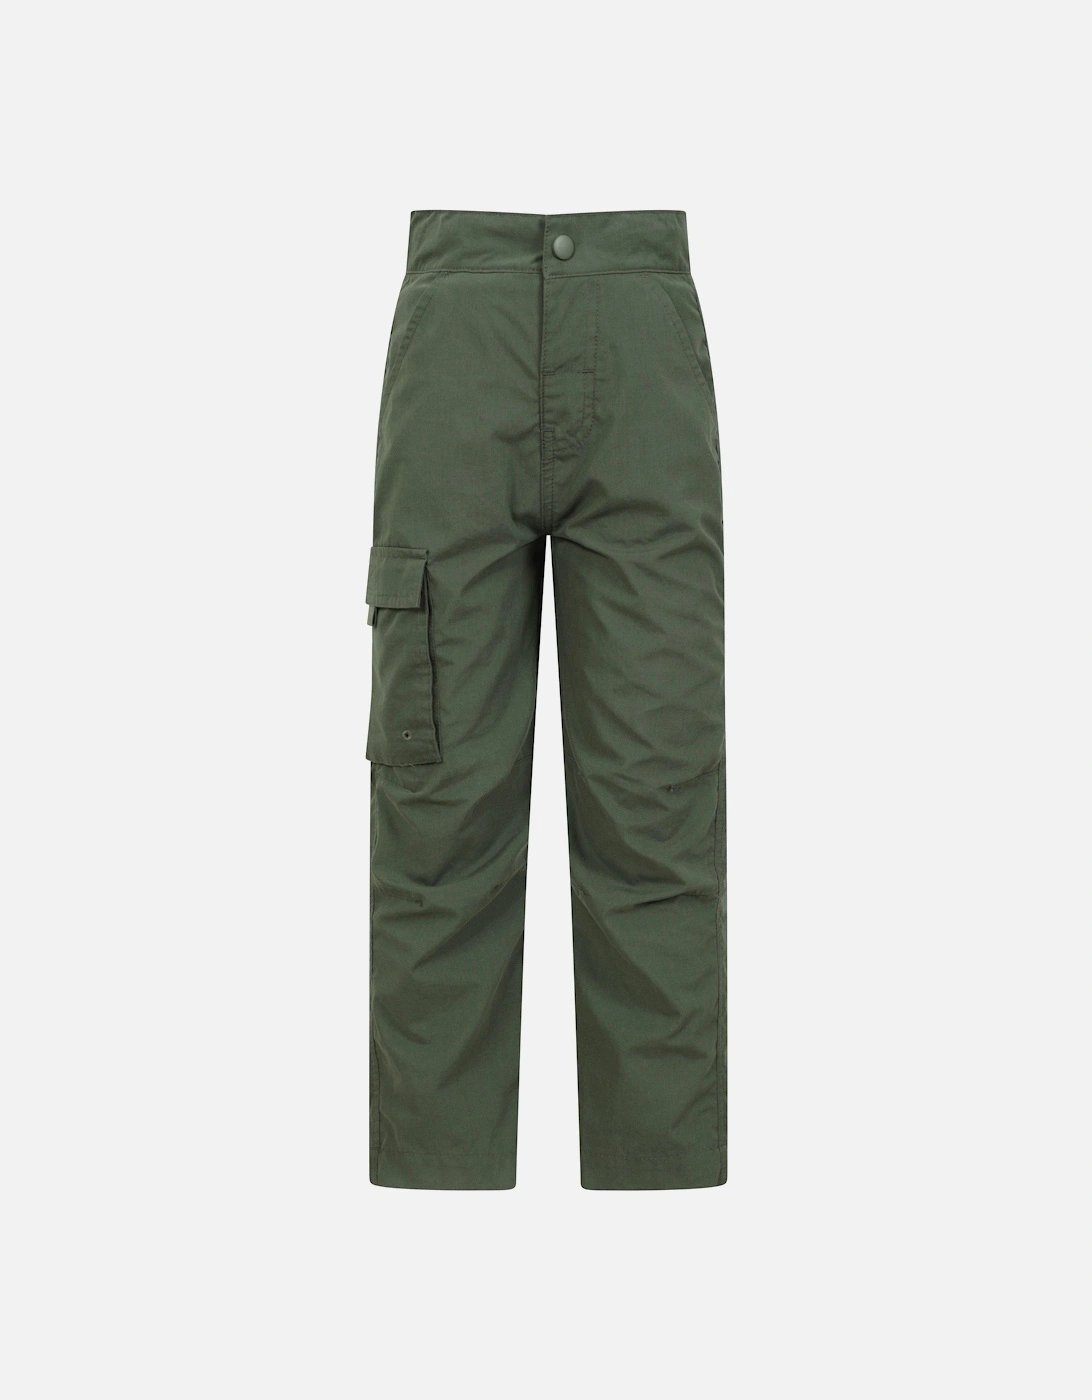 Childrens/Kids Active Hiking Trousers, 2 of 1